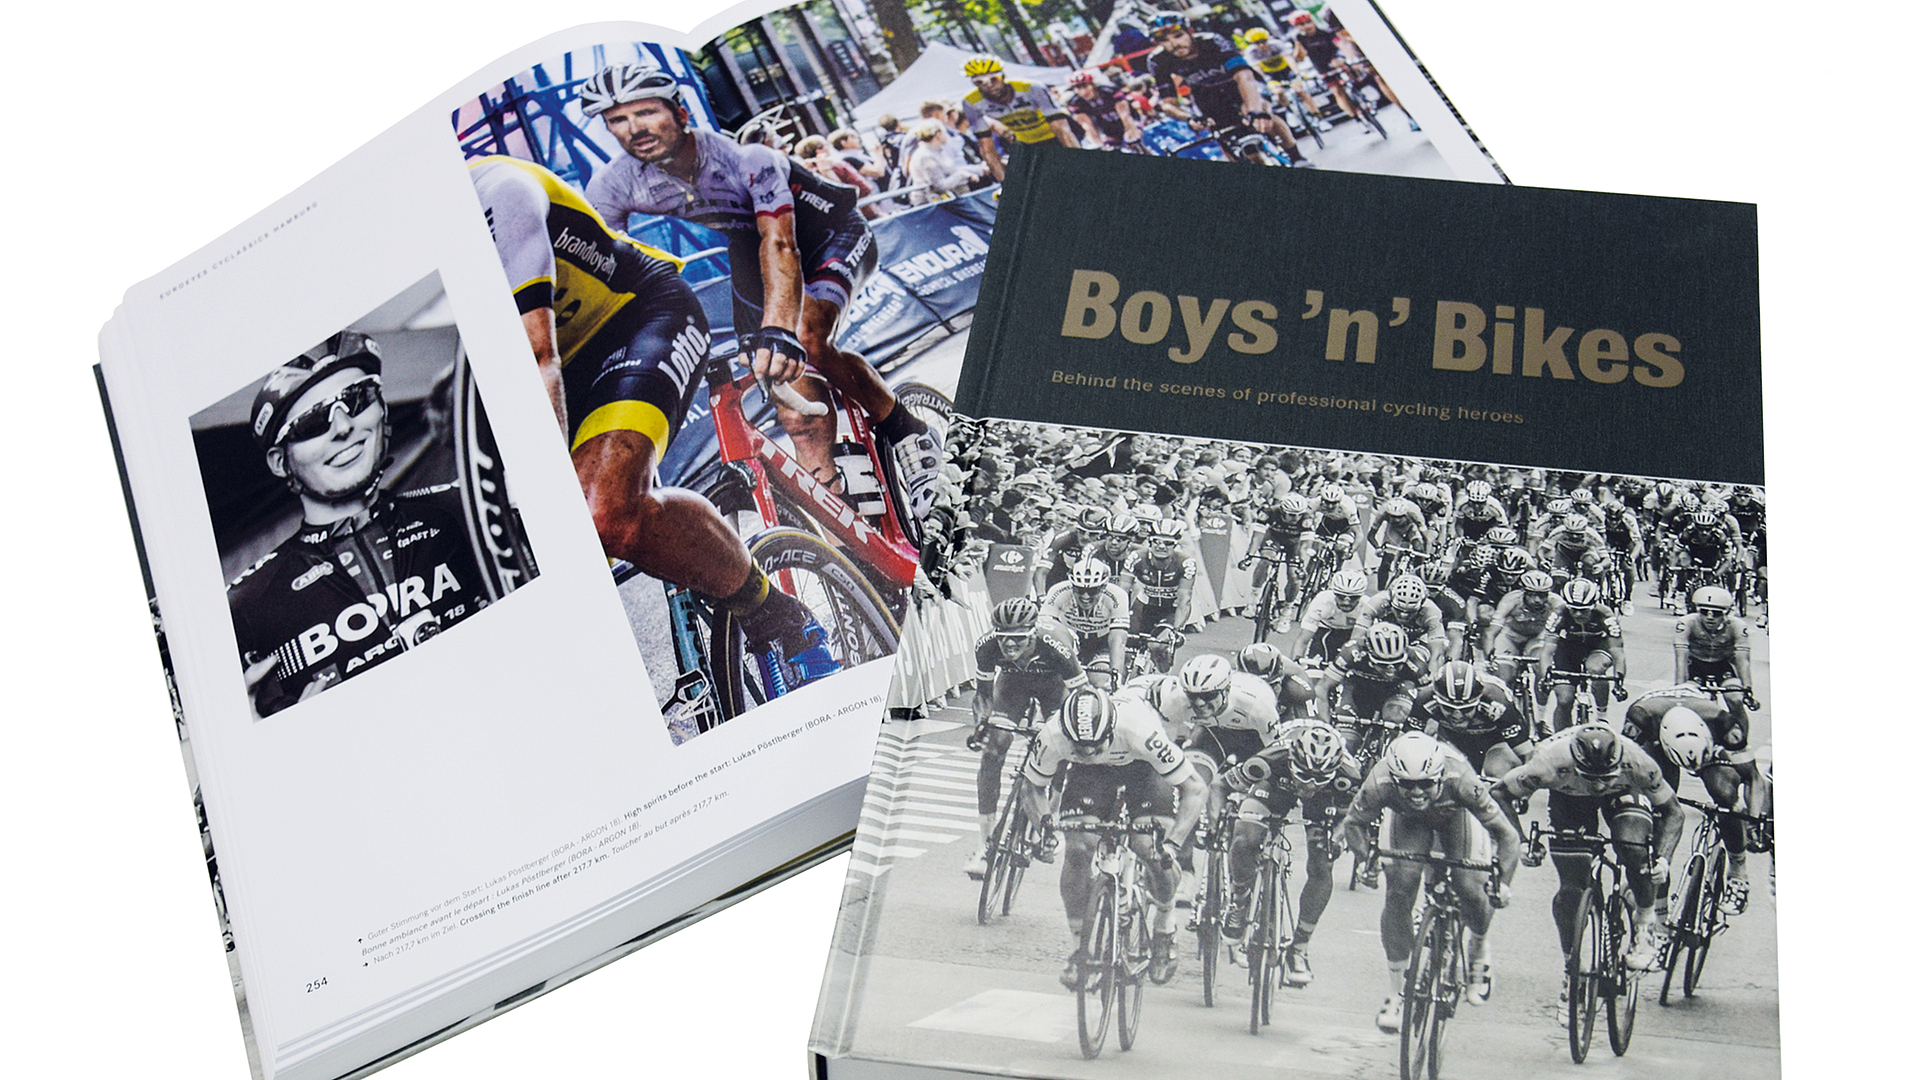 BORA energises its commitment to cycling with a fascinating picture book